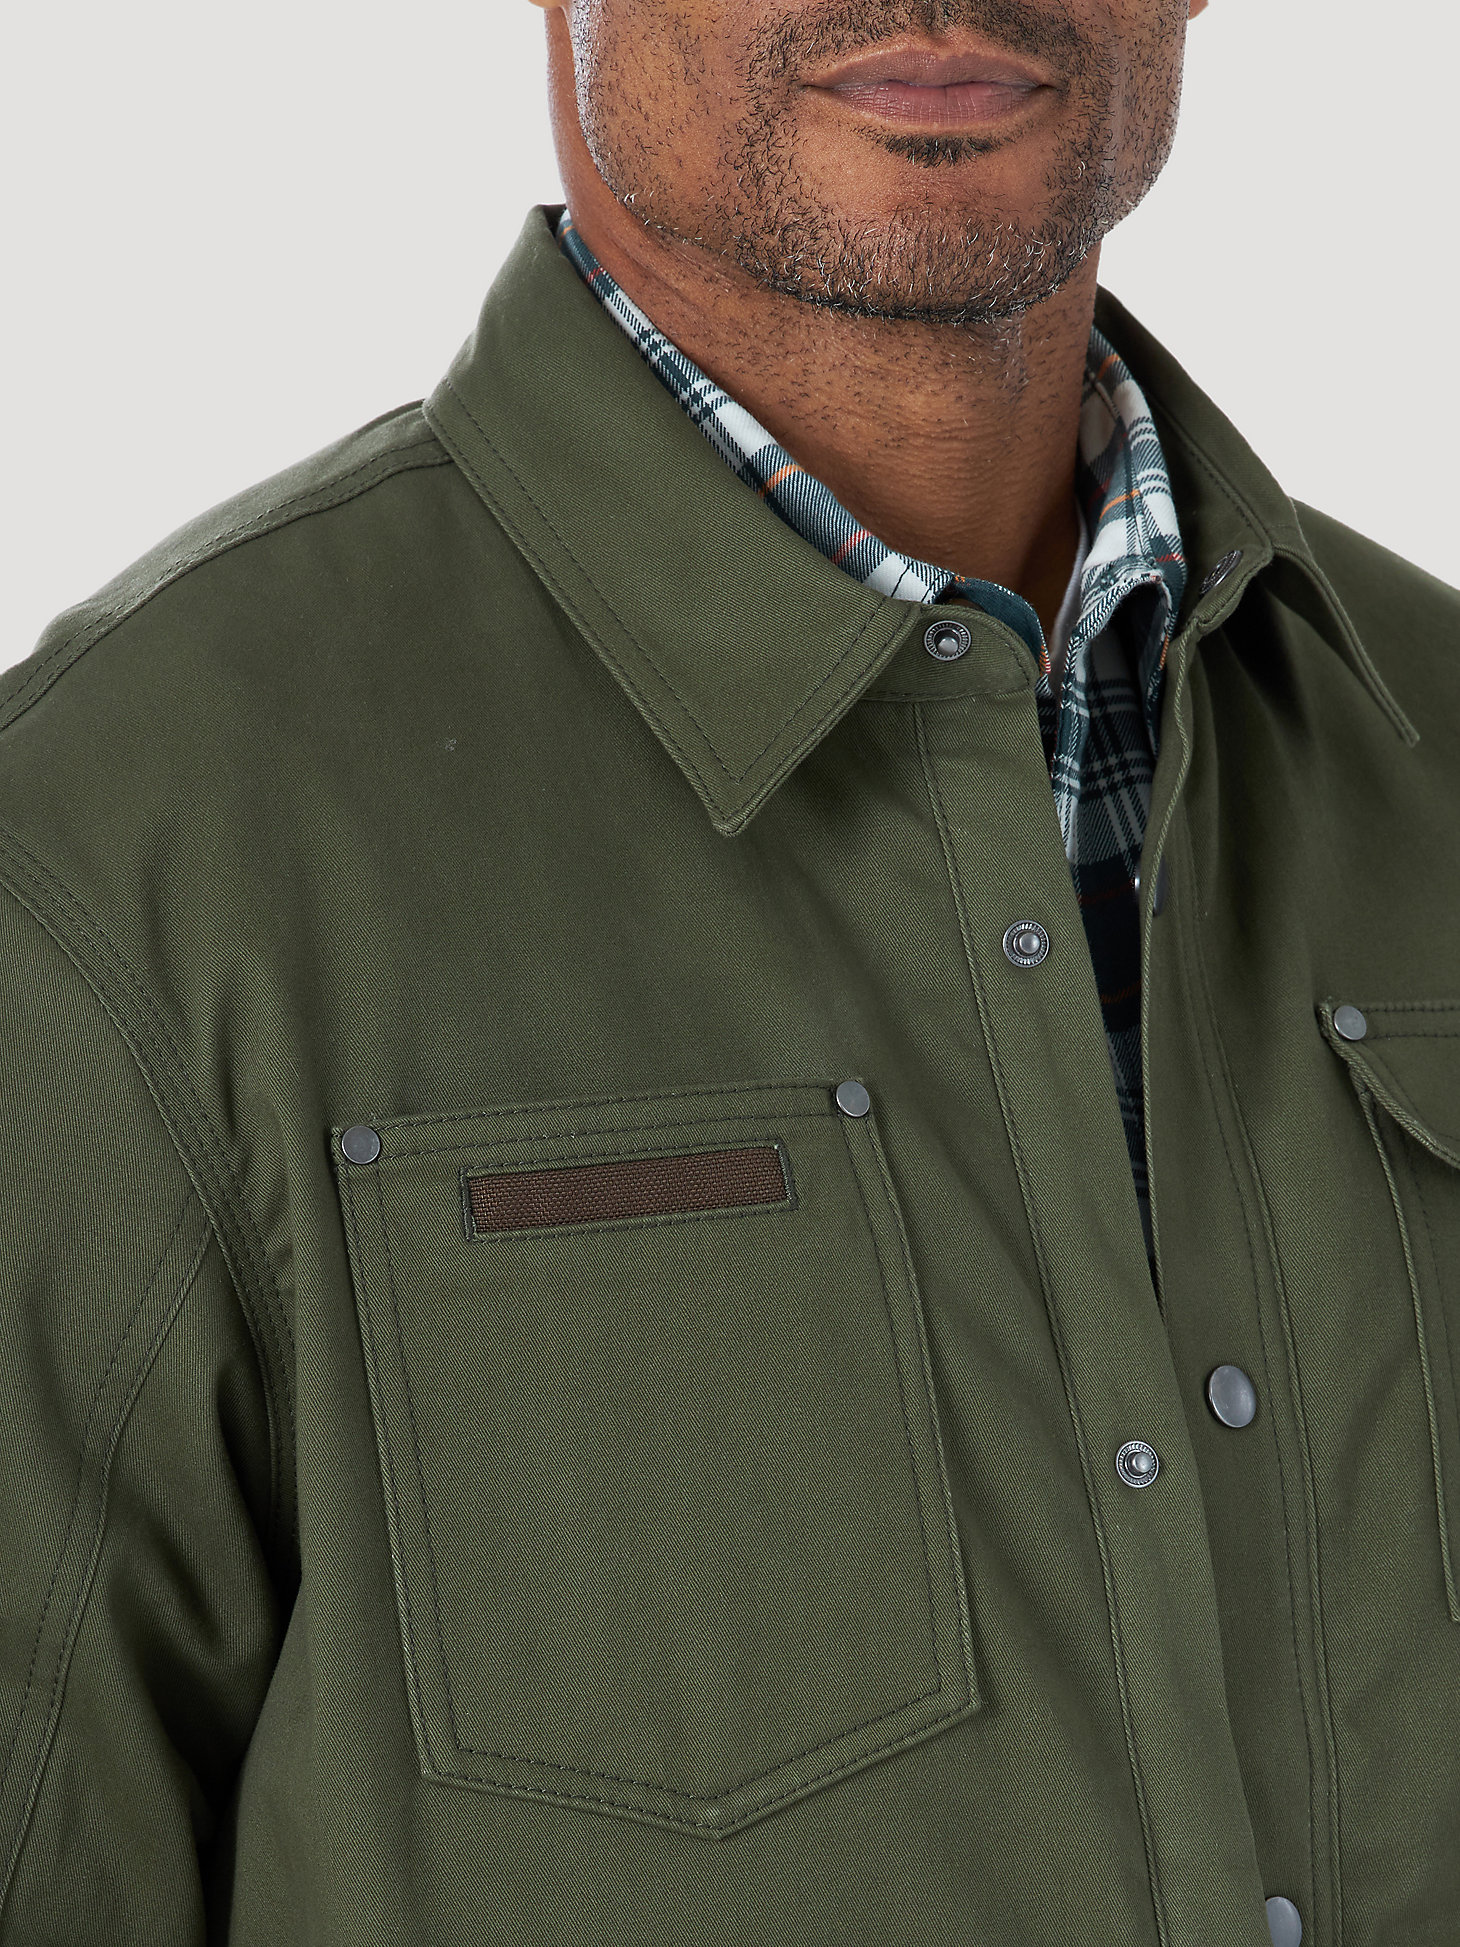 Wrangler® RIGGS Workwear® Tough Layers Fleece Lined Work Shirt Jacket in Loden alternative view 2